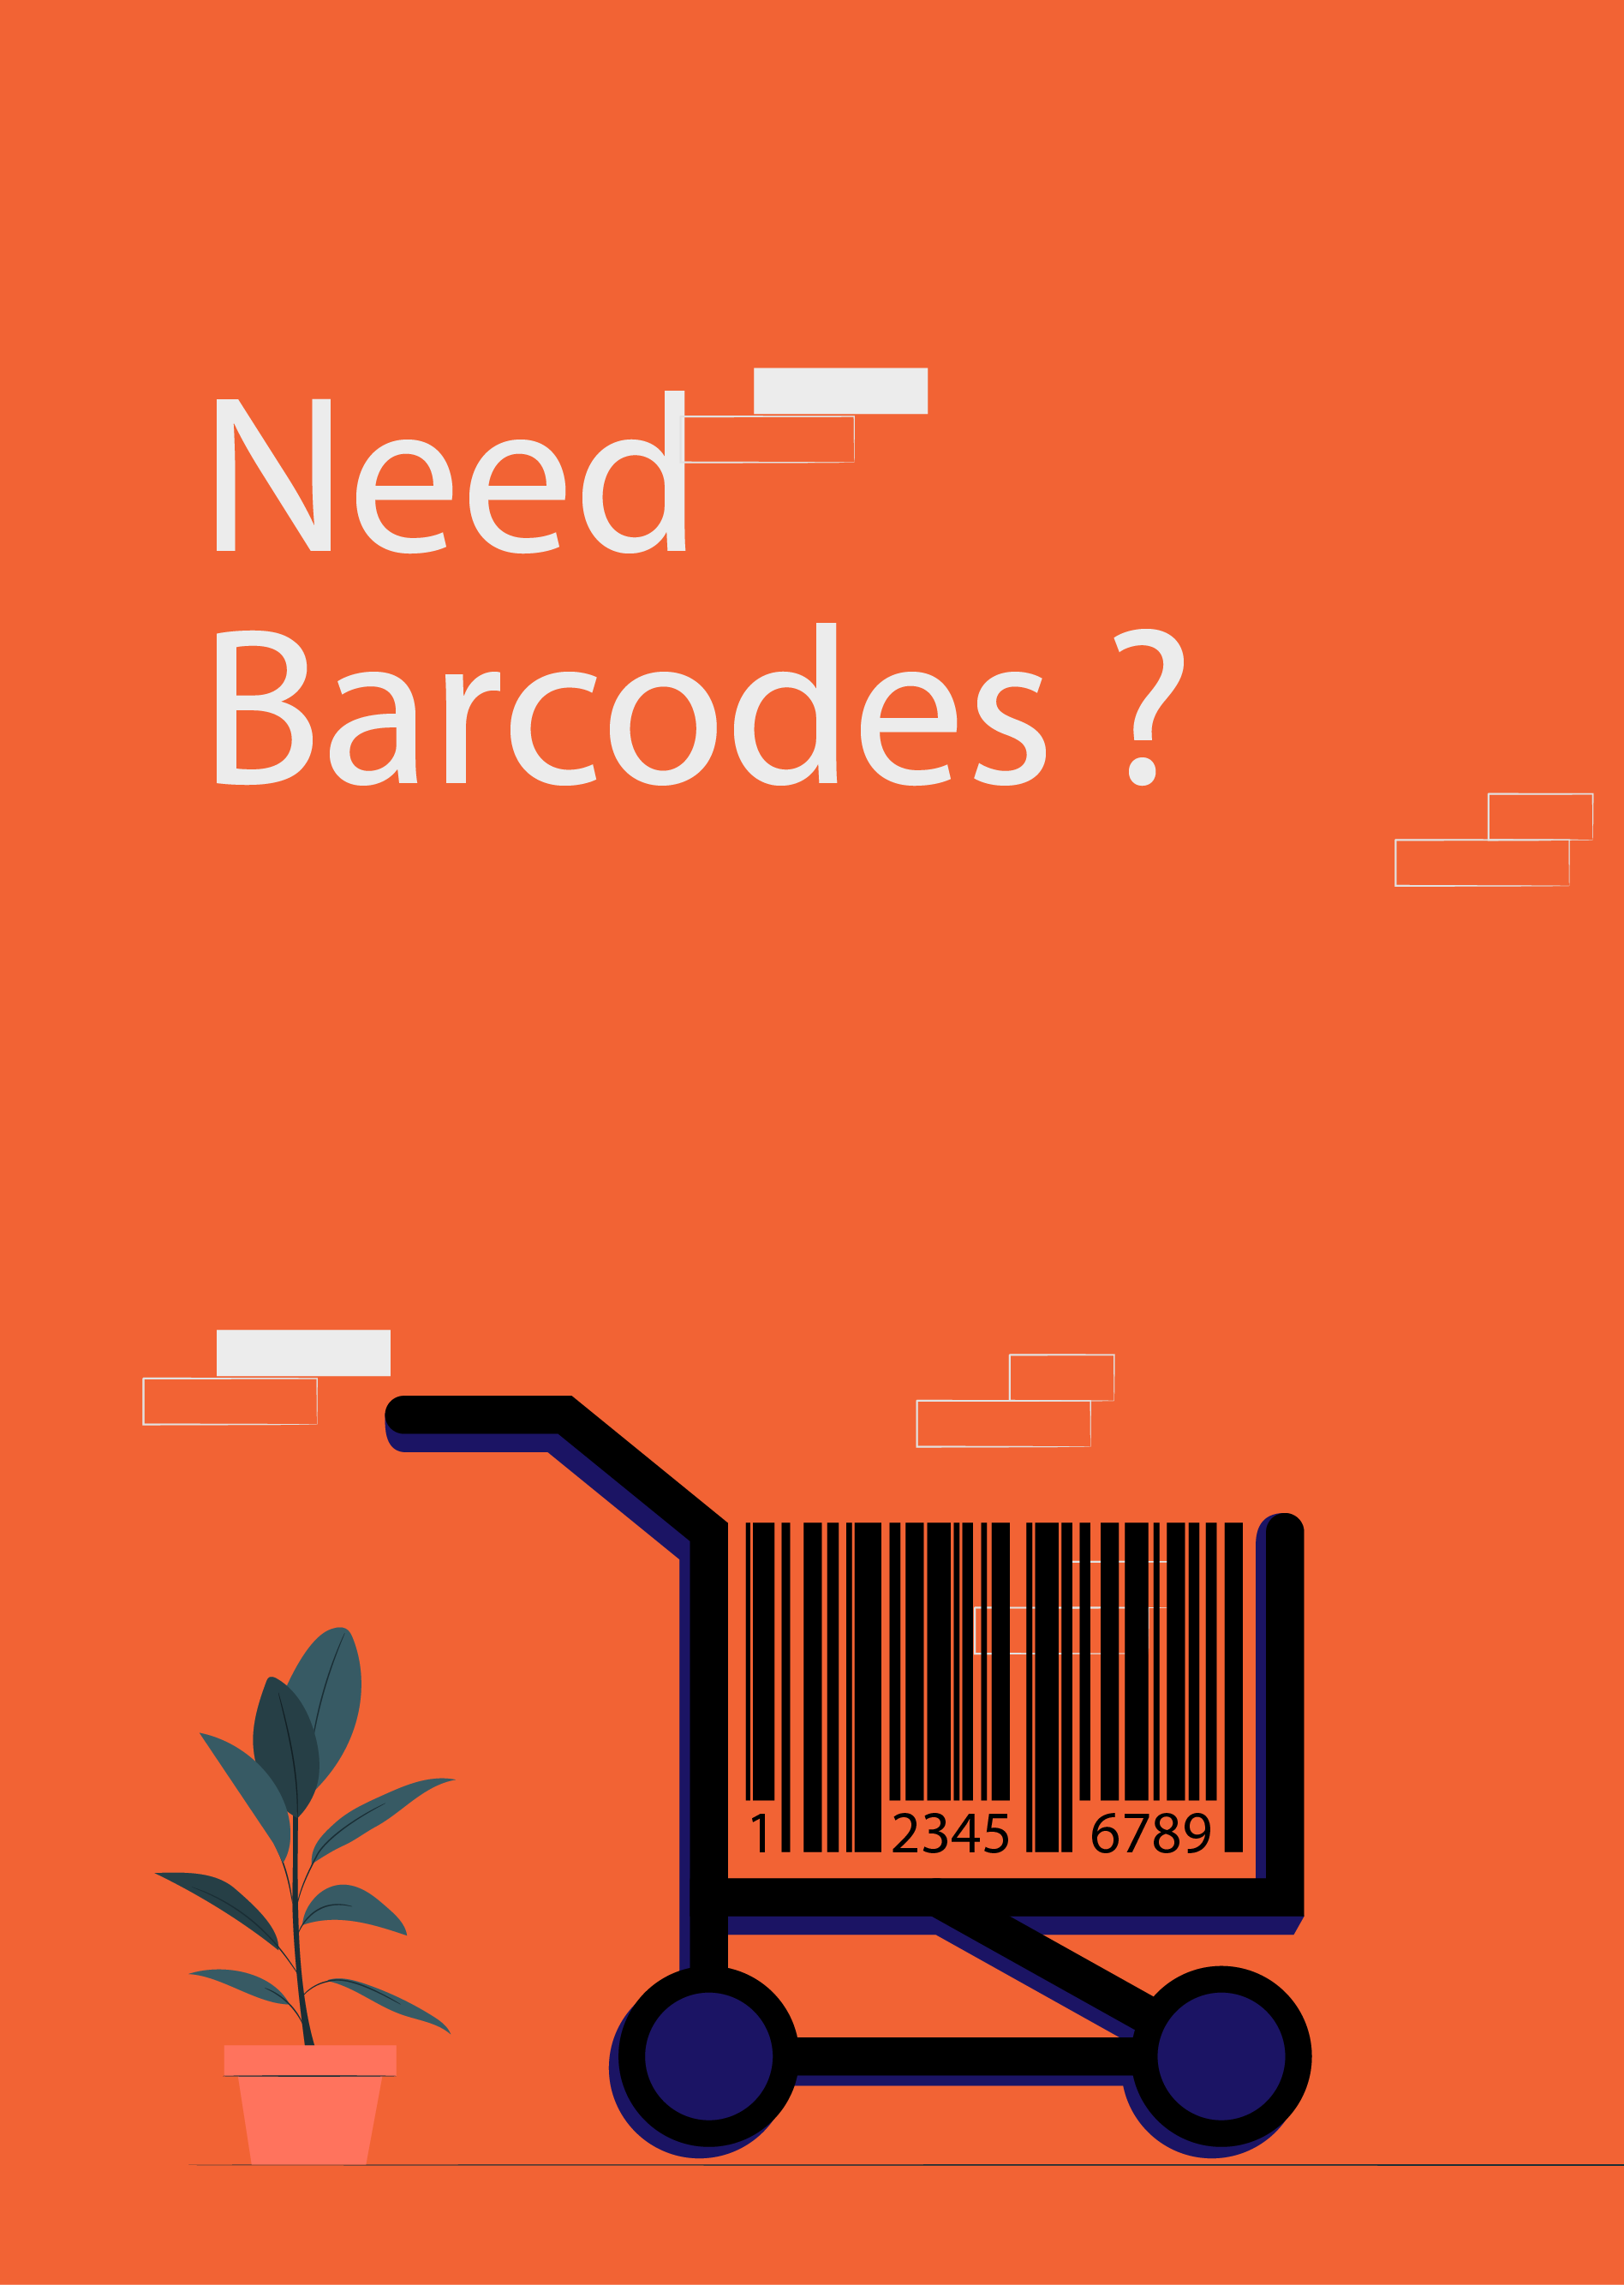 Buy 100% authentic barcodes